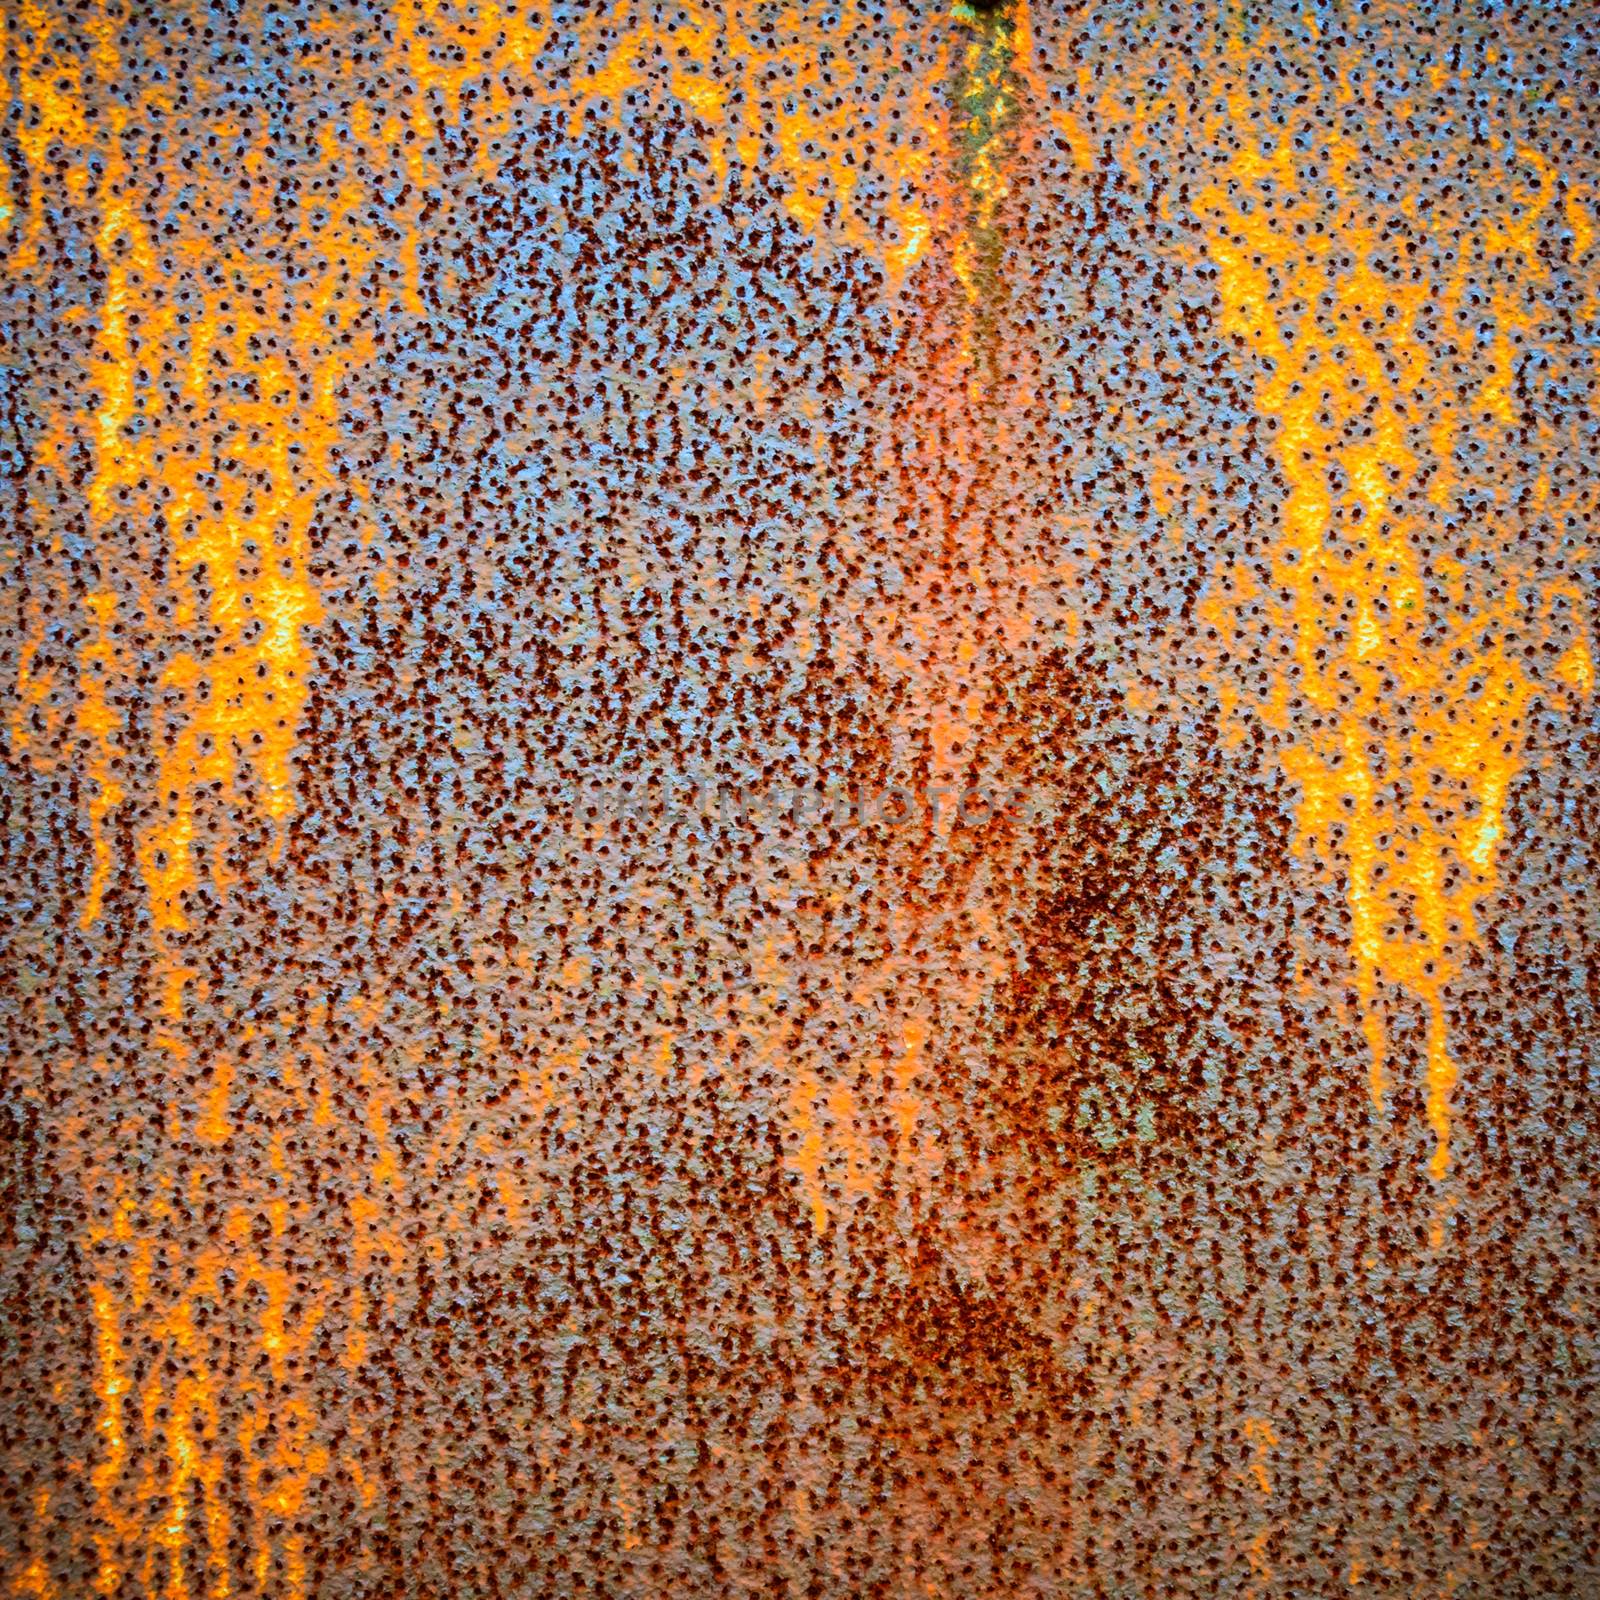 Rusty steel sheet texture or background